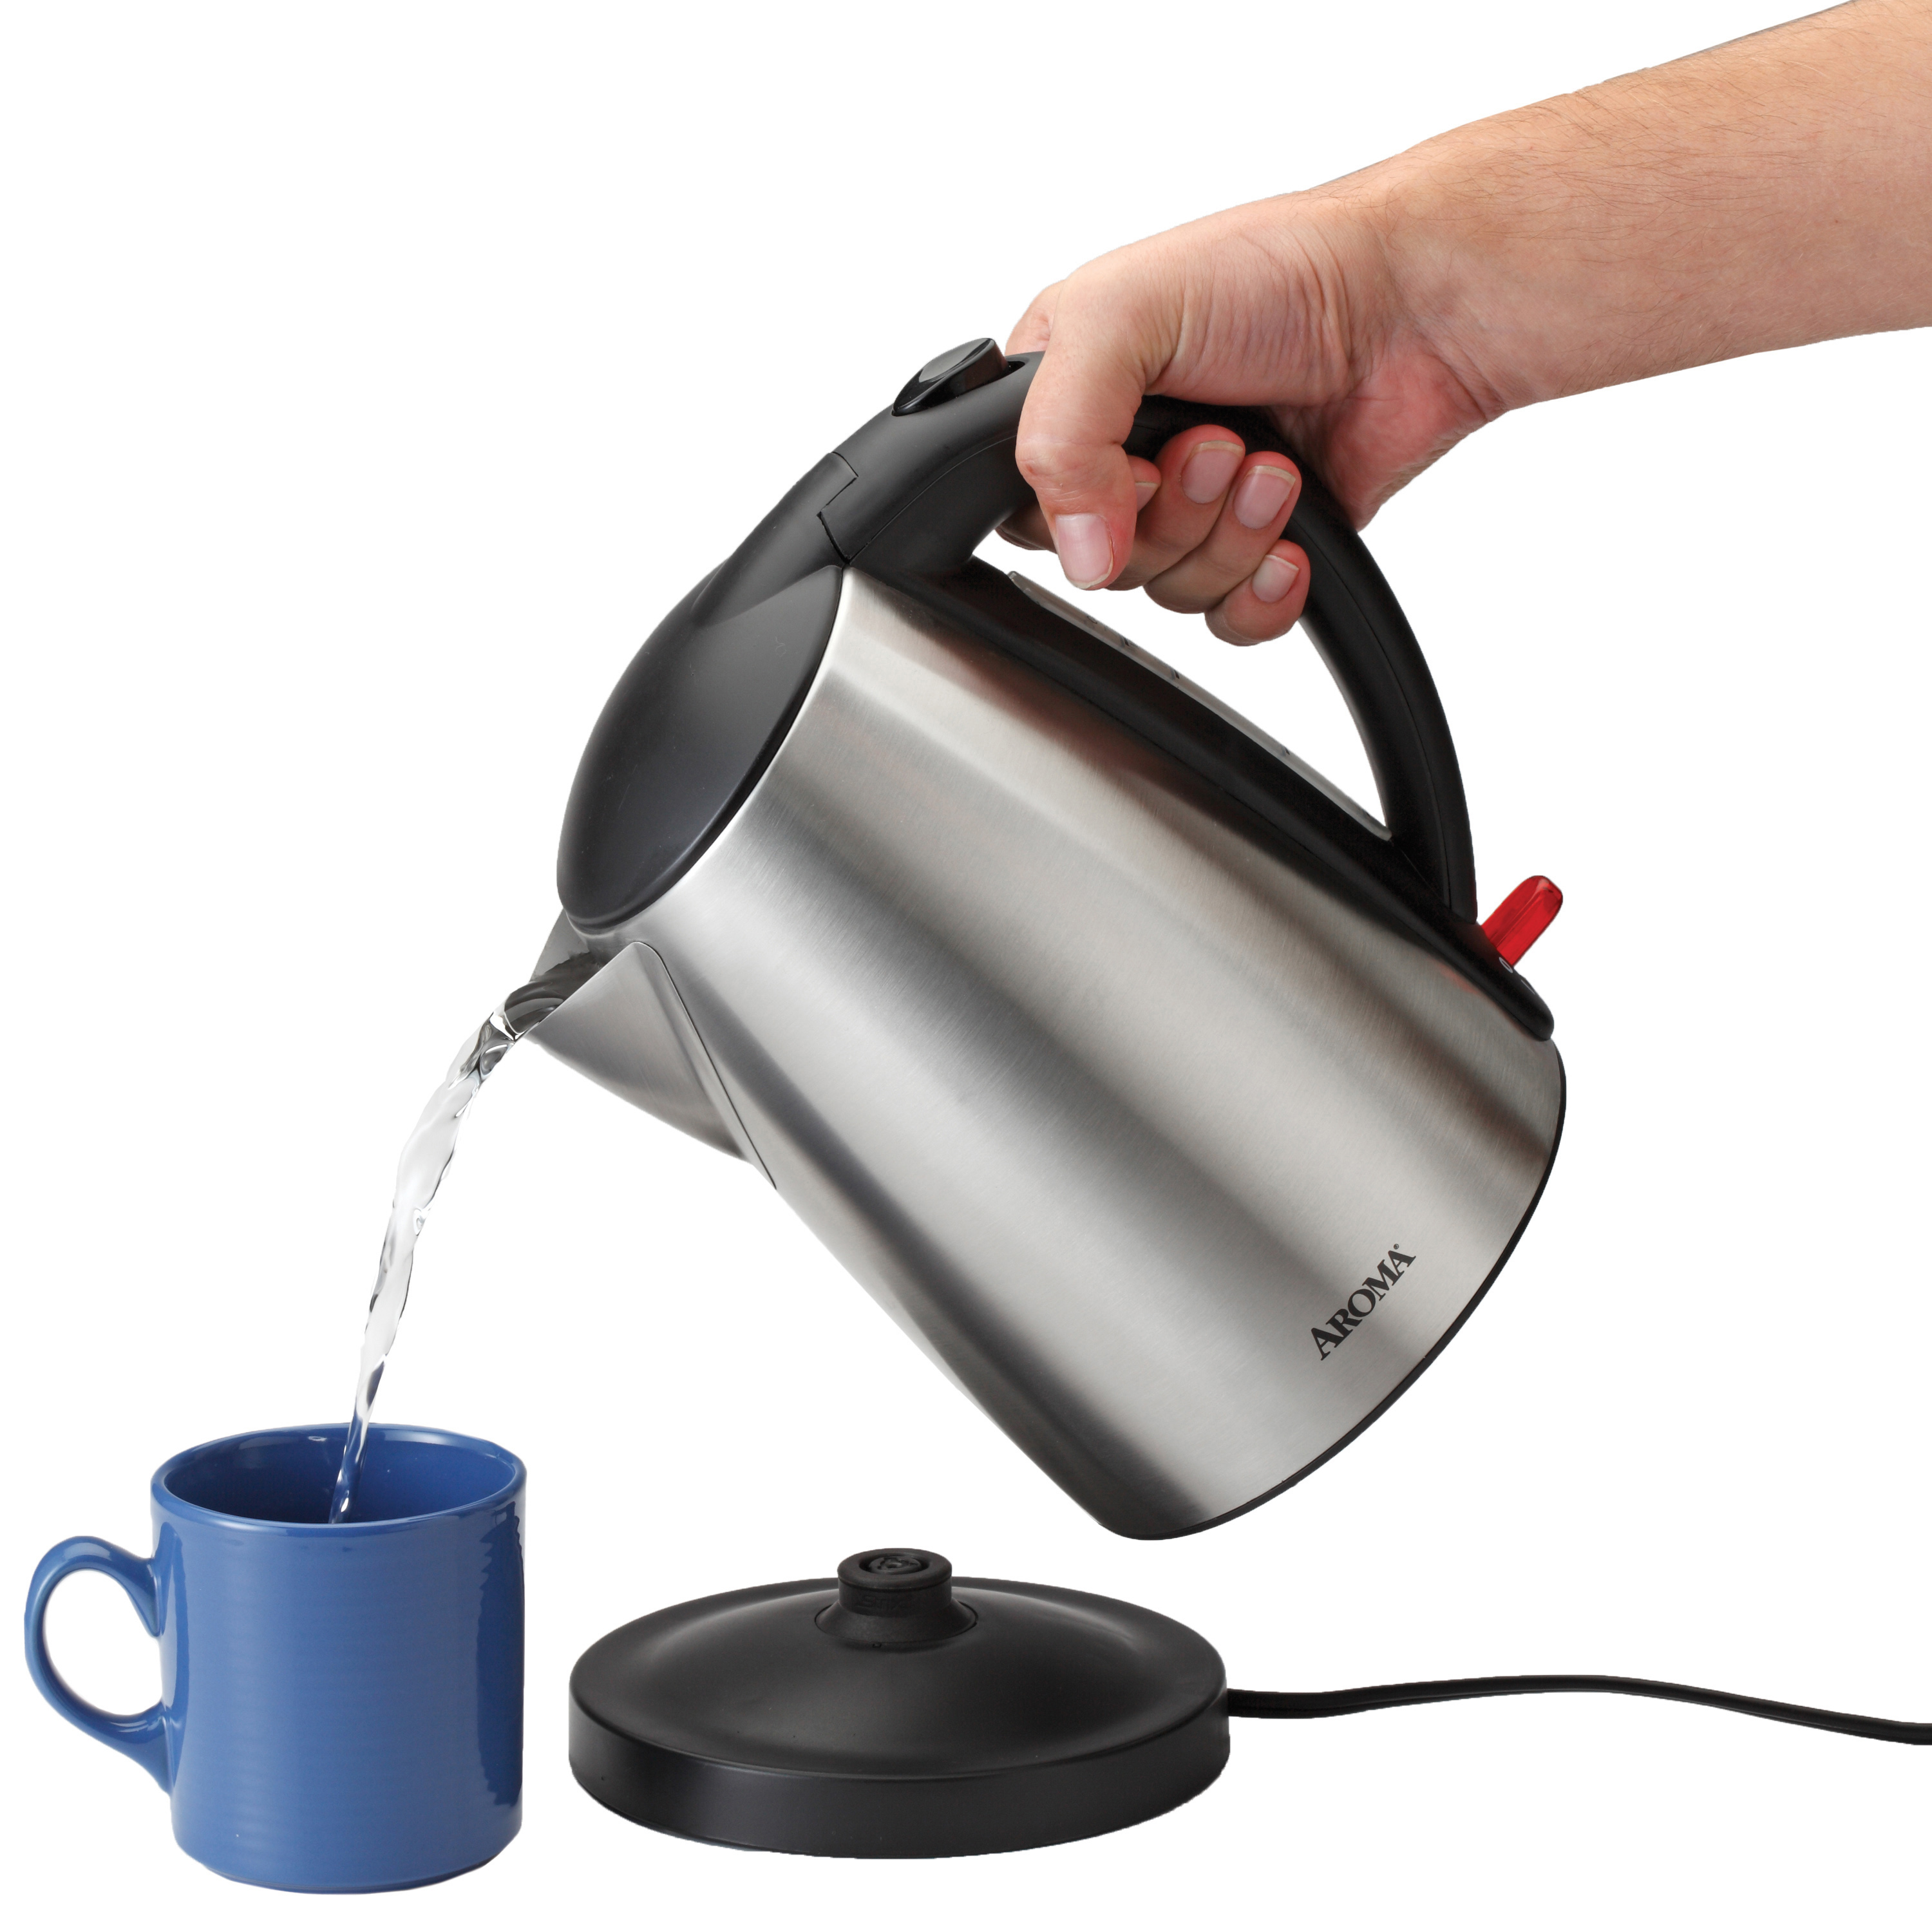 aroma 1.7 l electric kettle